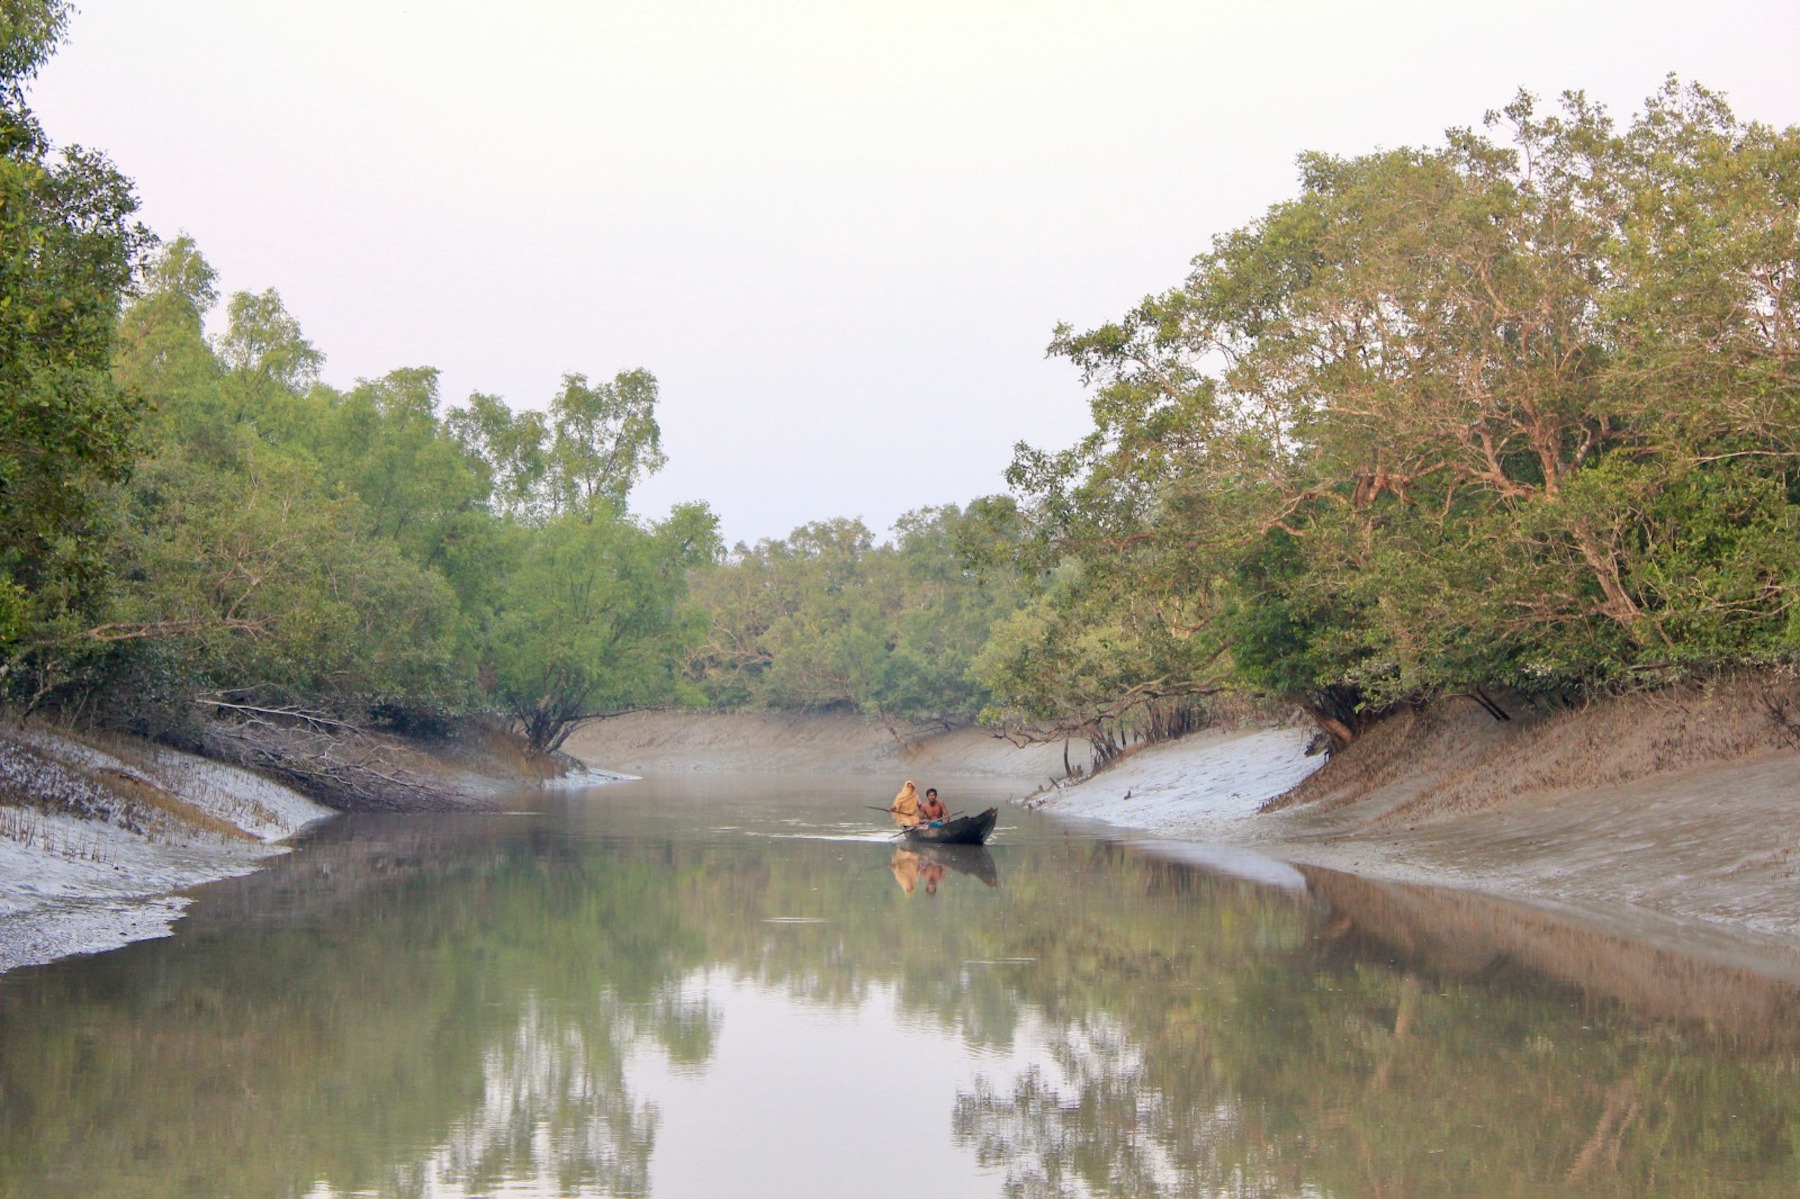 Quantifying net loss of global mangrove carbon stocks from 20 years of land cover change